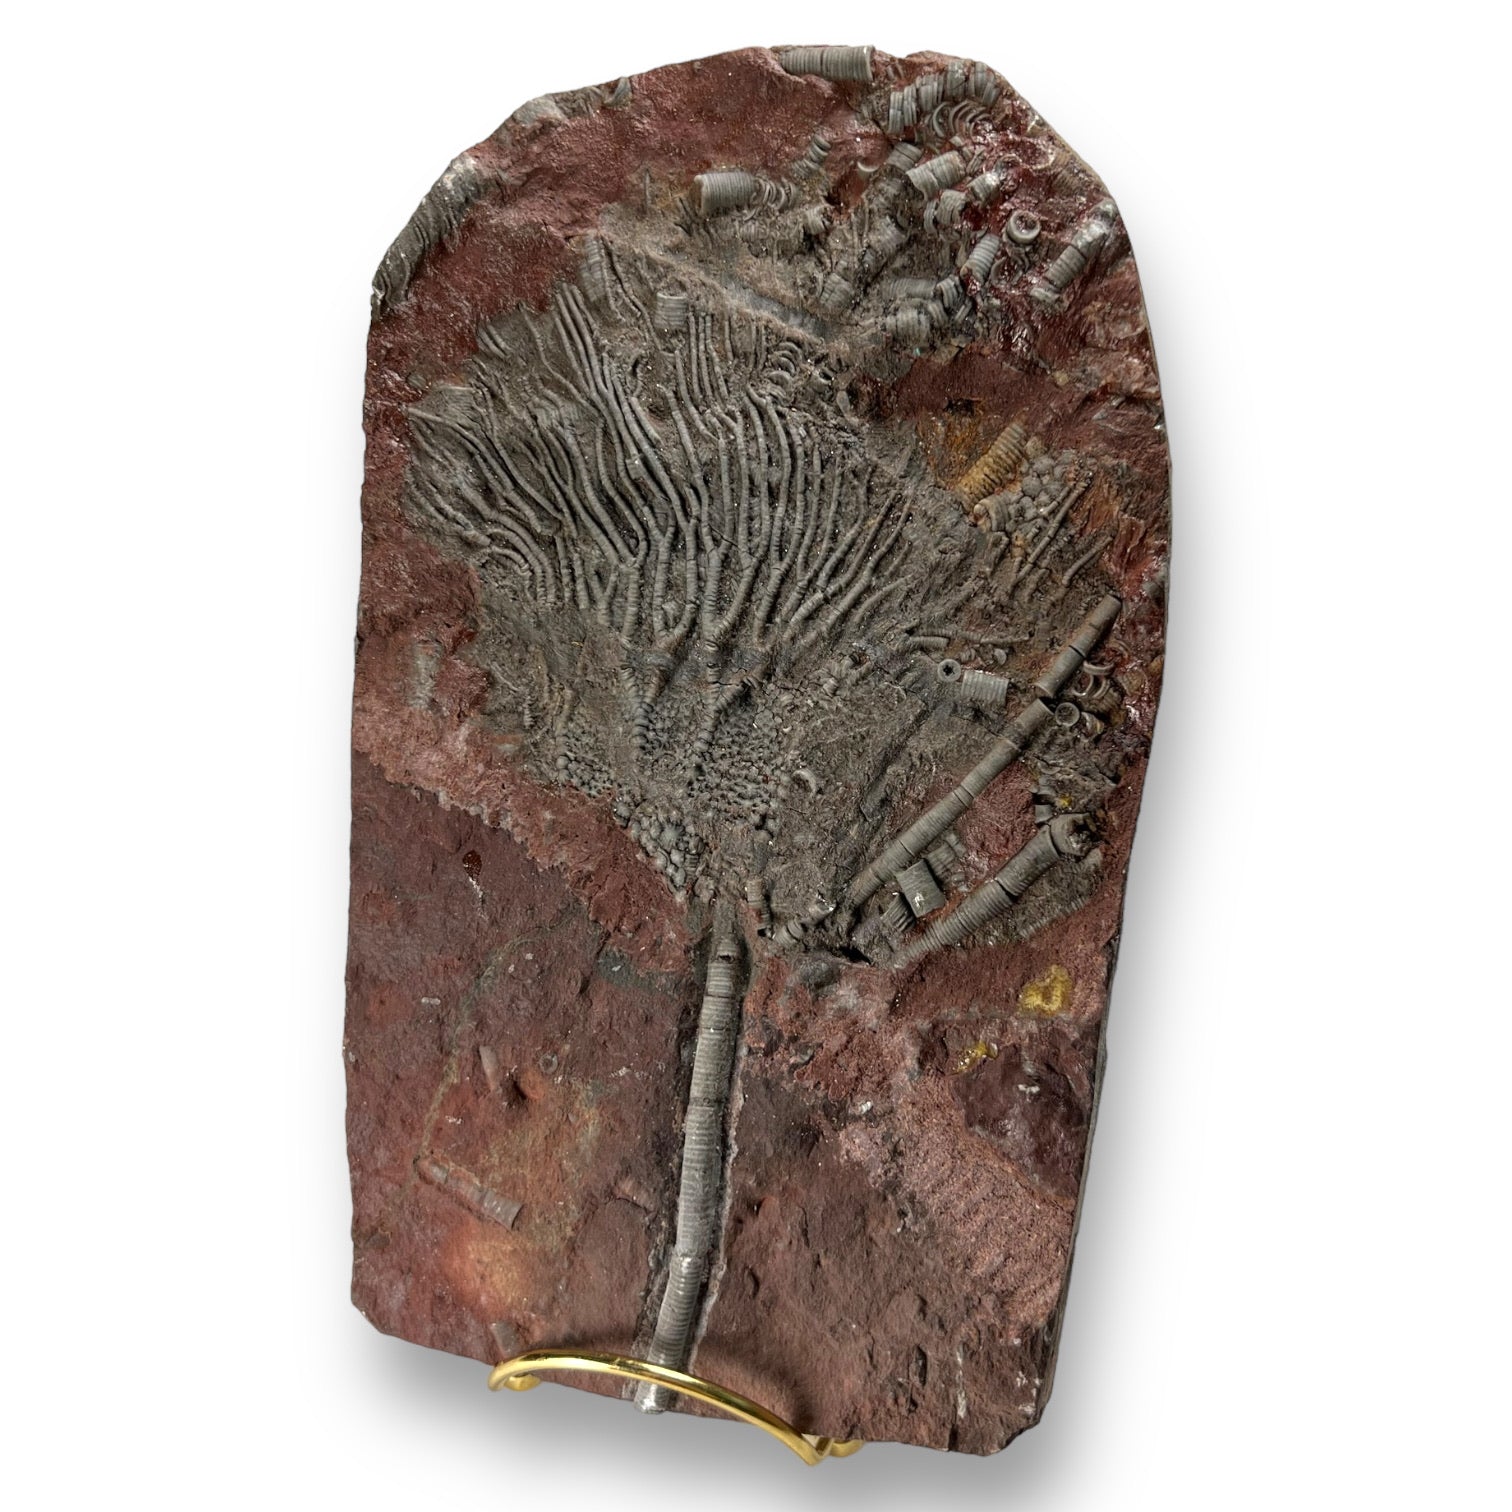 #9 Fossil Crinoid Plate (Scyphocrinites), 7 by 5 inches - Silurian Period - 423 to 419.2 MYA - Morocco